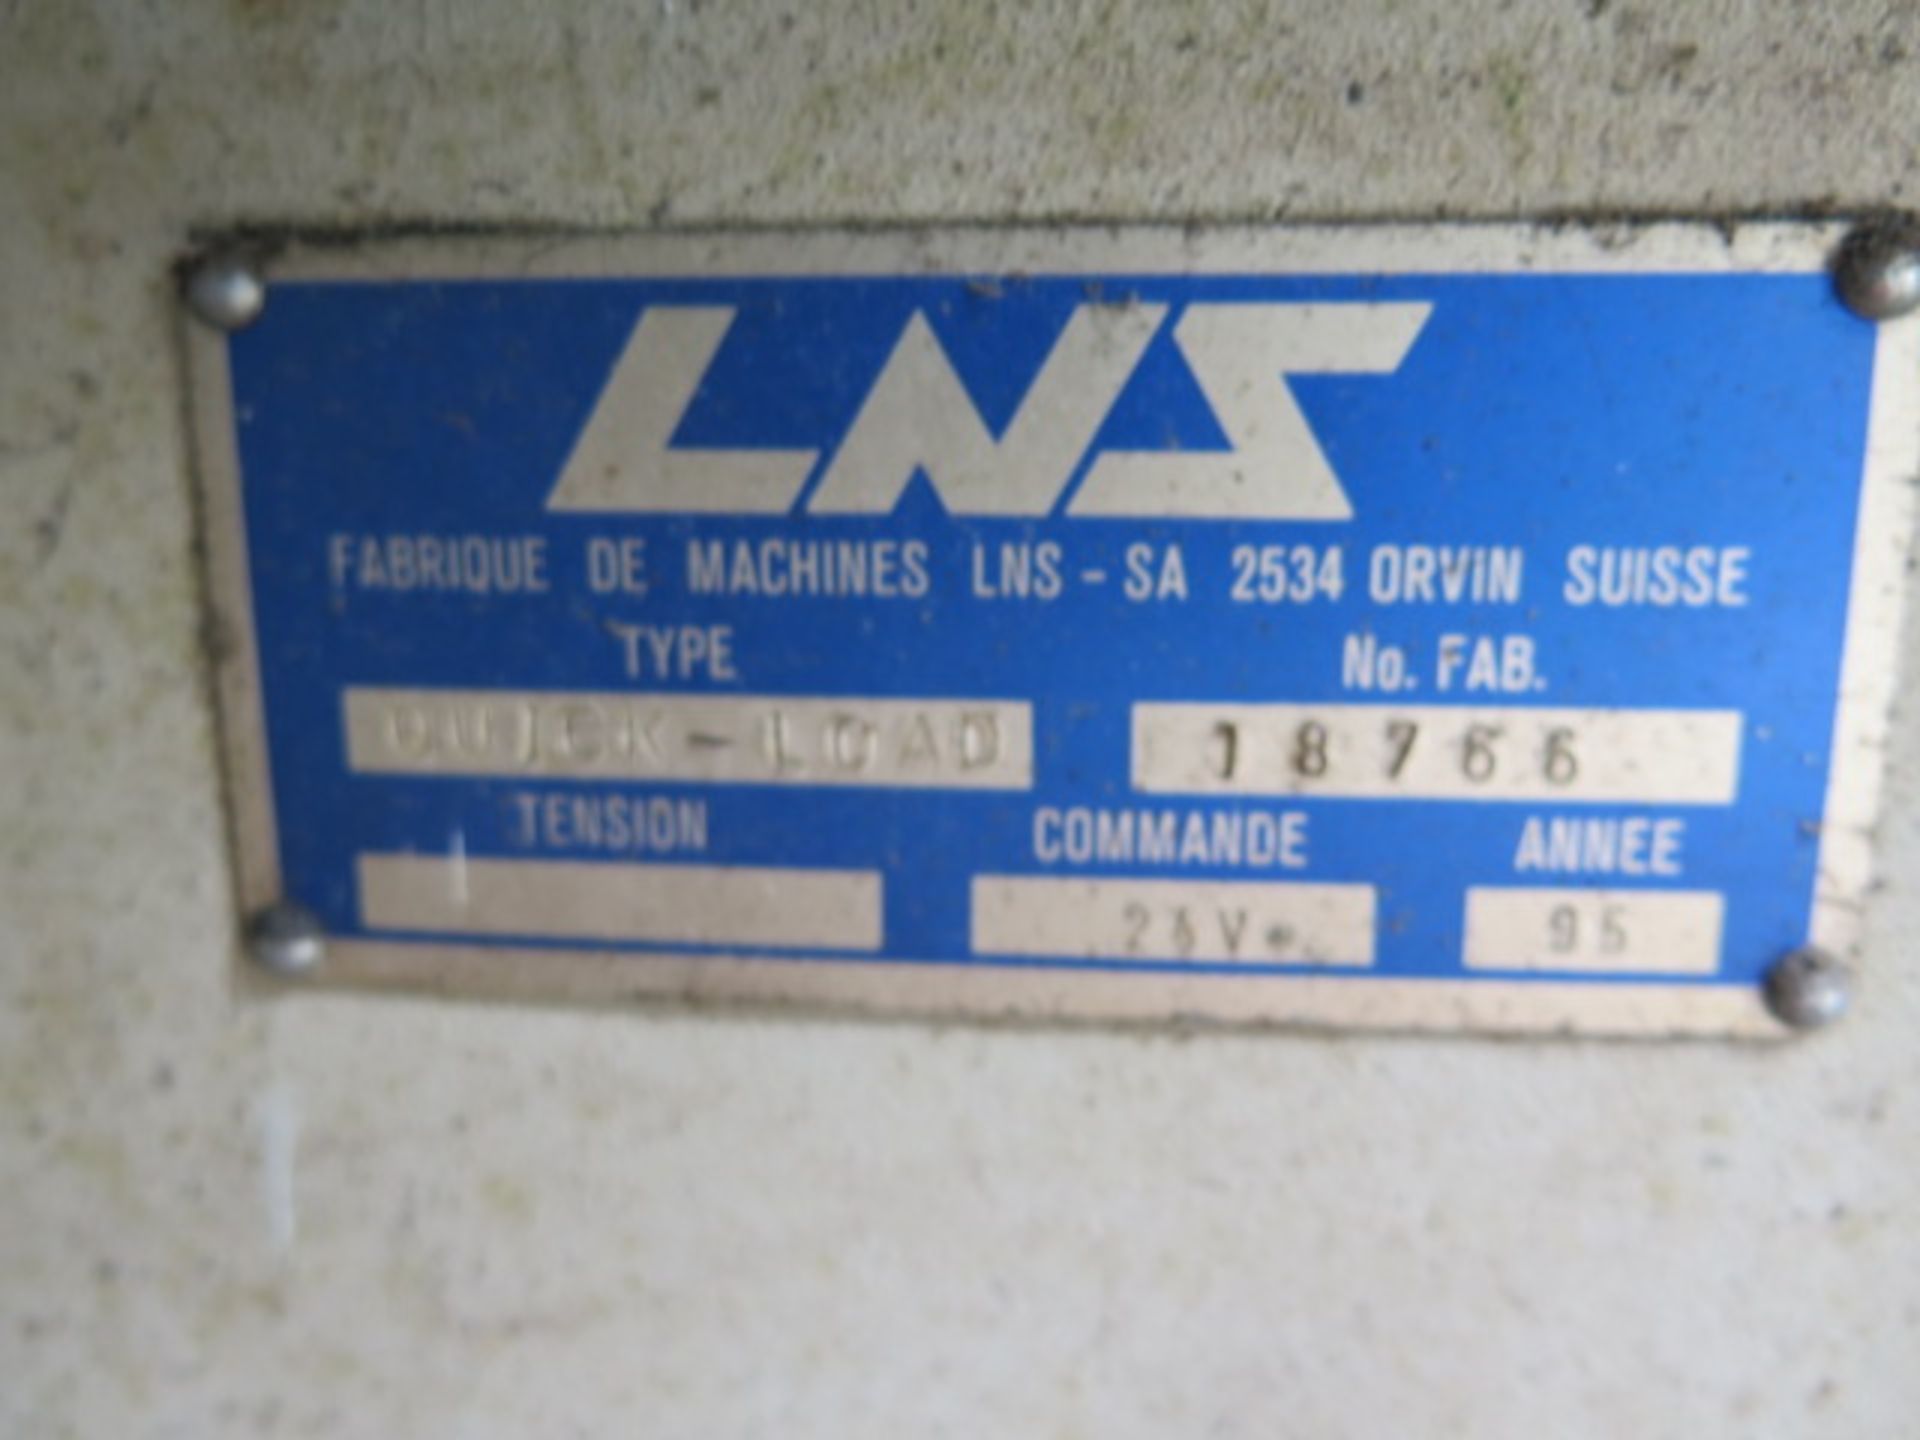 LNS Quick Load Automatic Bar Loader / Feeder (SOLD AS-IS - NO WARRANTY) (Located at 2091 Fortune Dr. - Image 6 of 6